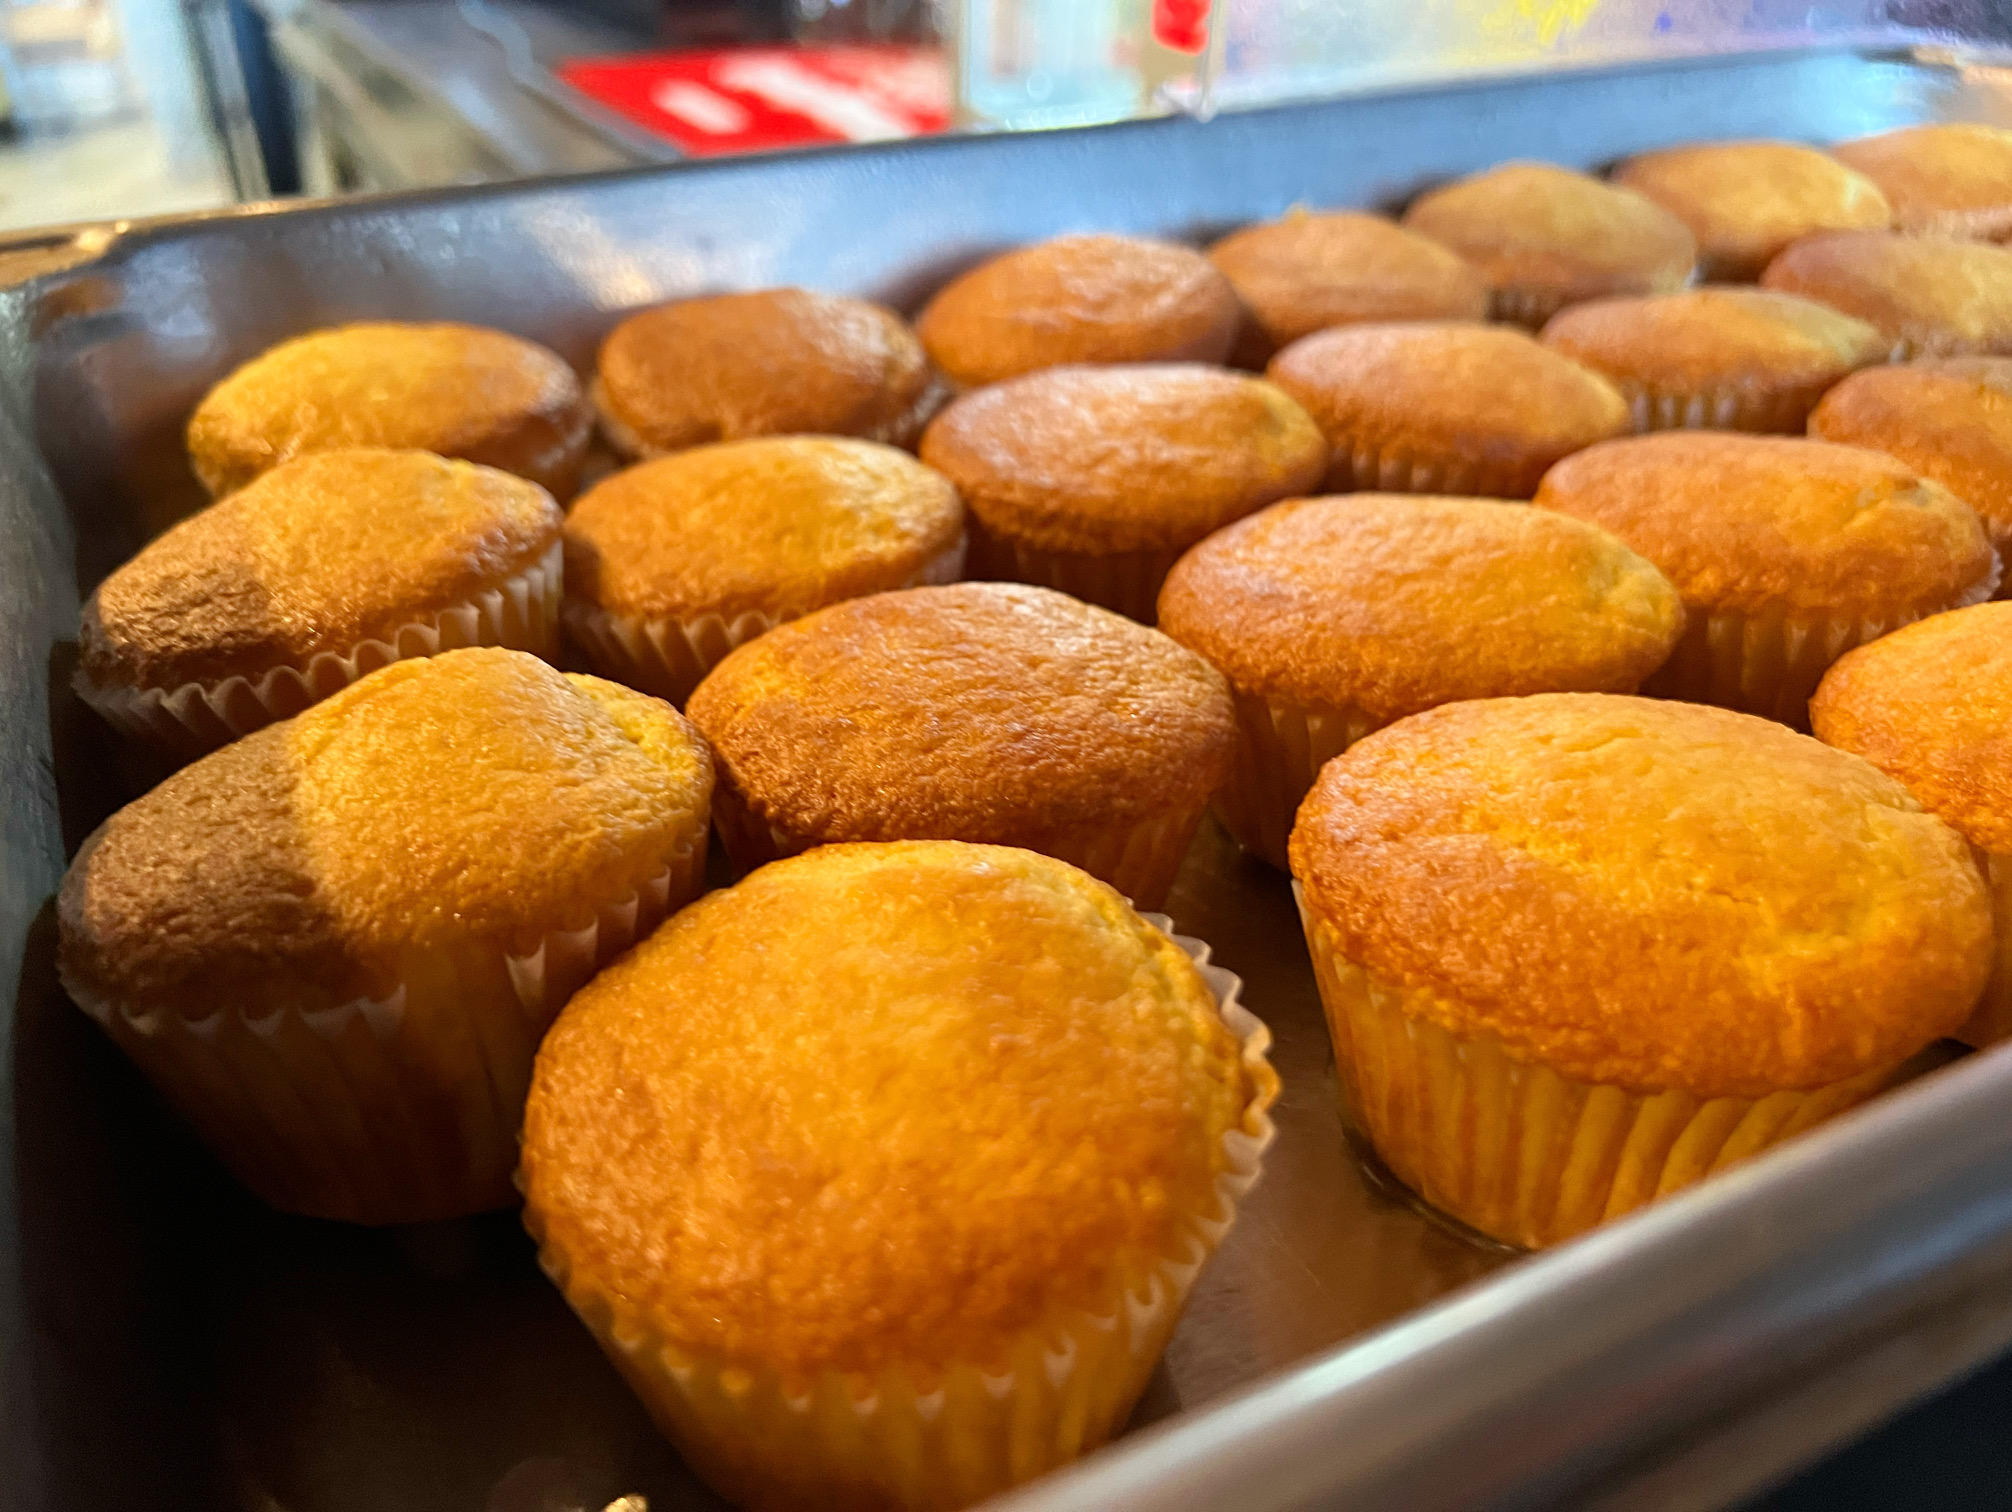 A silver tray holds rows of golden cornbread muffins. Photo by Alyssa Buckley.